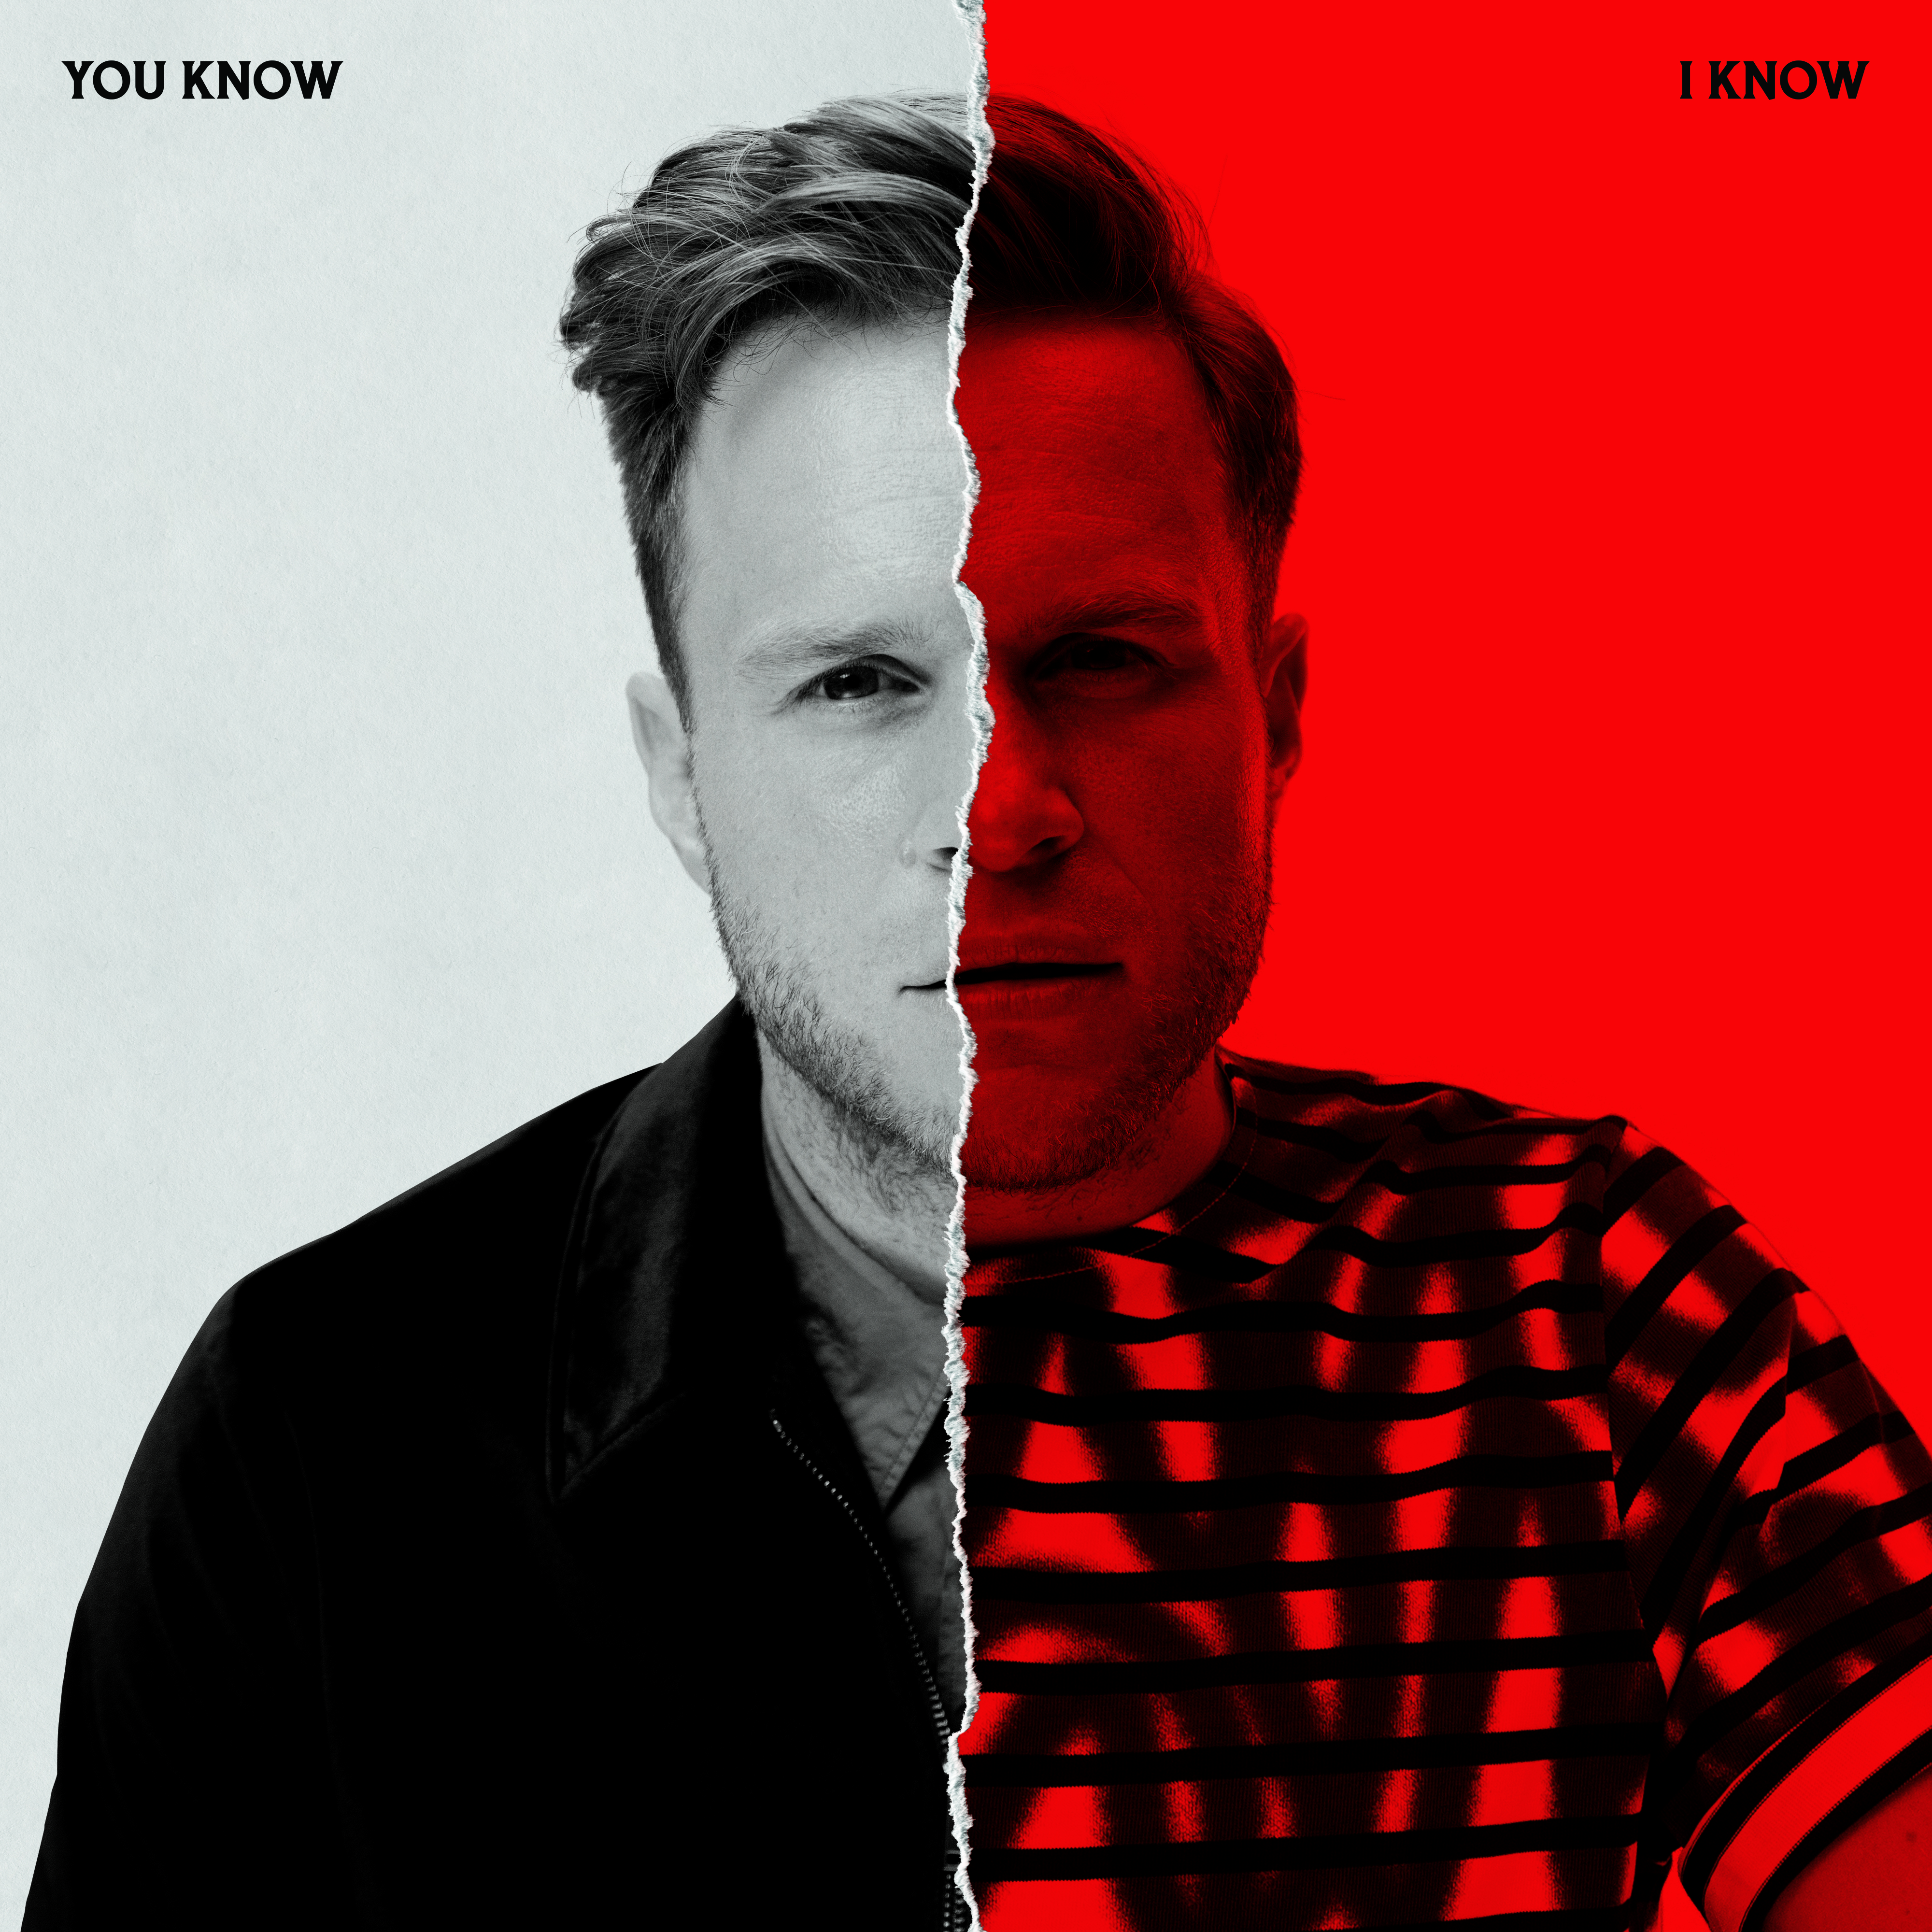 Olly Murs releases sixth studio album ‘You Know I Know’